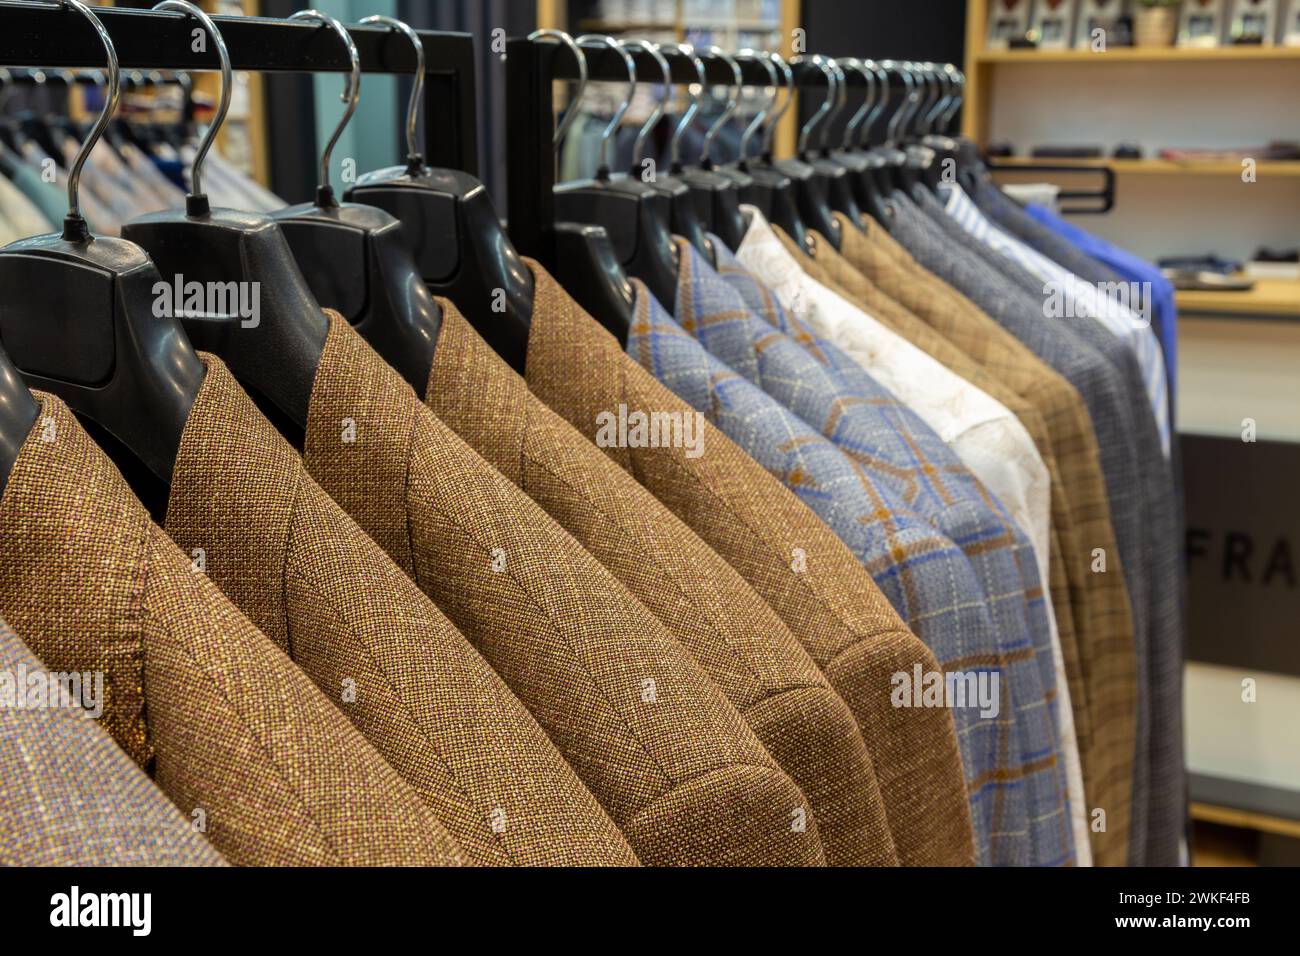 A row of men's suits, jackets hanging on a rack for display. Elegant man suit jackets hanging in a row on hangers. Stock Photo